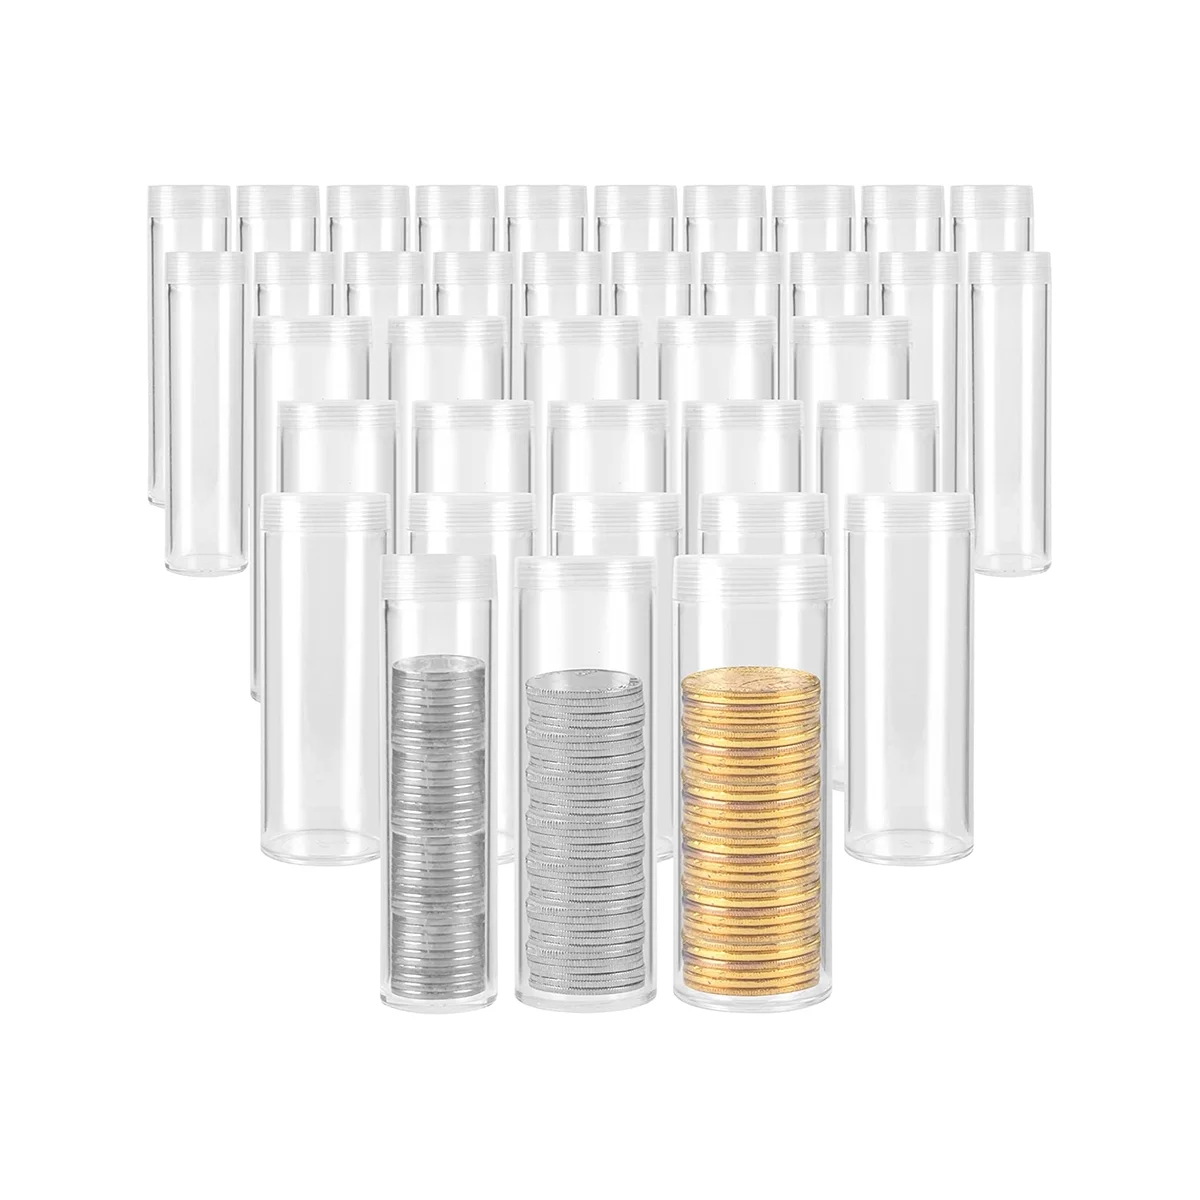 

35 Pieces Coin Tubes Assorted Sizes Coin Storage Tubes Clear Plastic Coin Tubes Nickel Coin Tubes